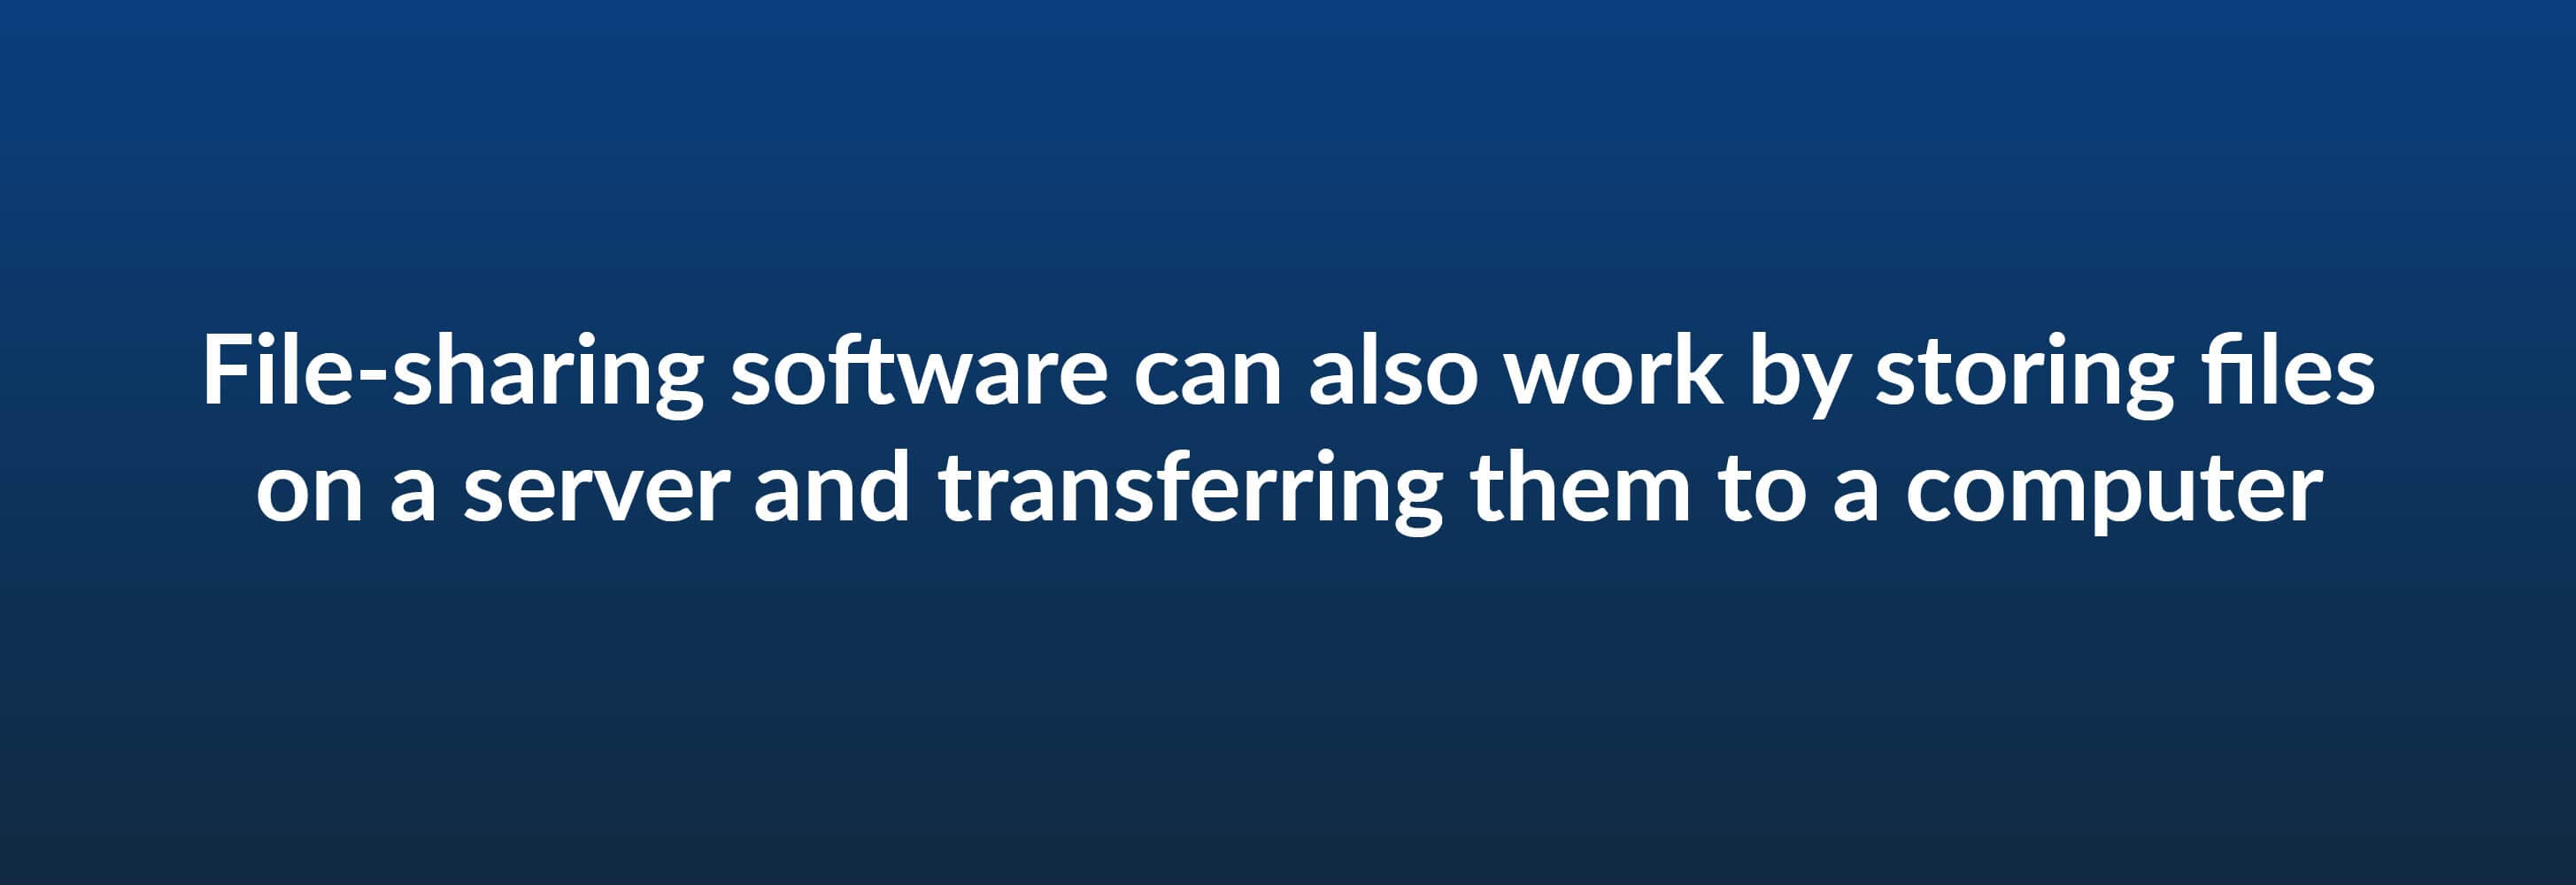 File-sharing software can also work by storing files on a server and transferring them to a computer